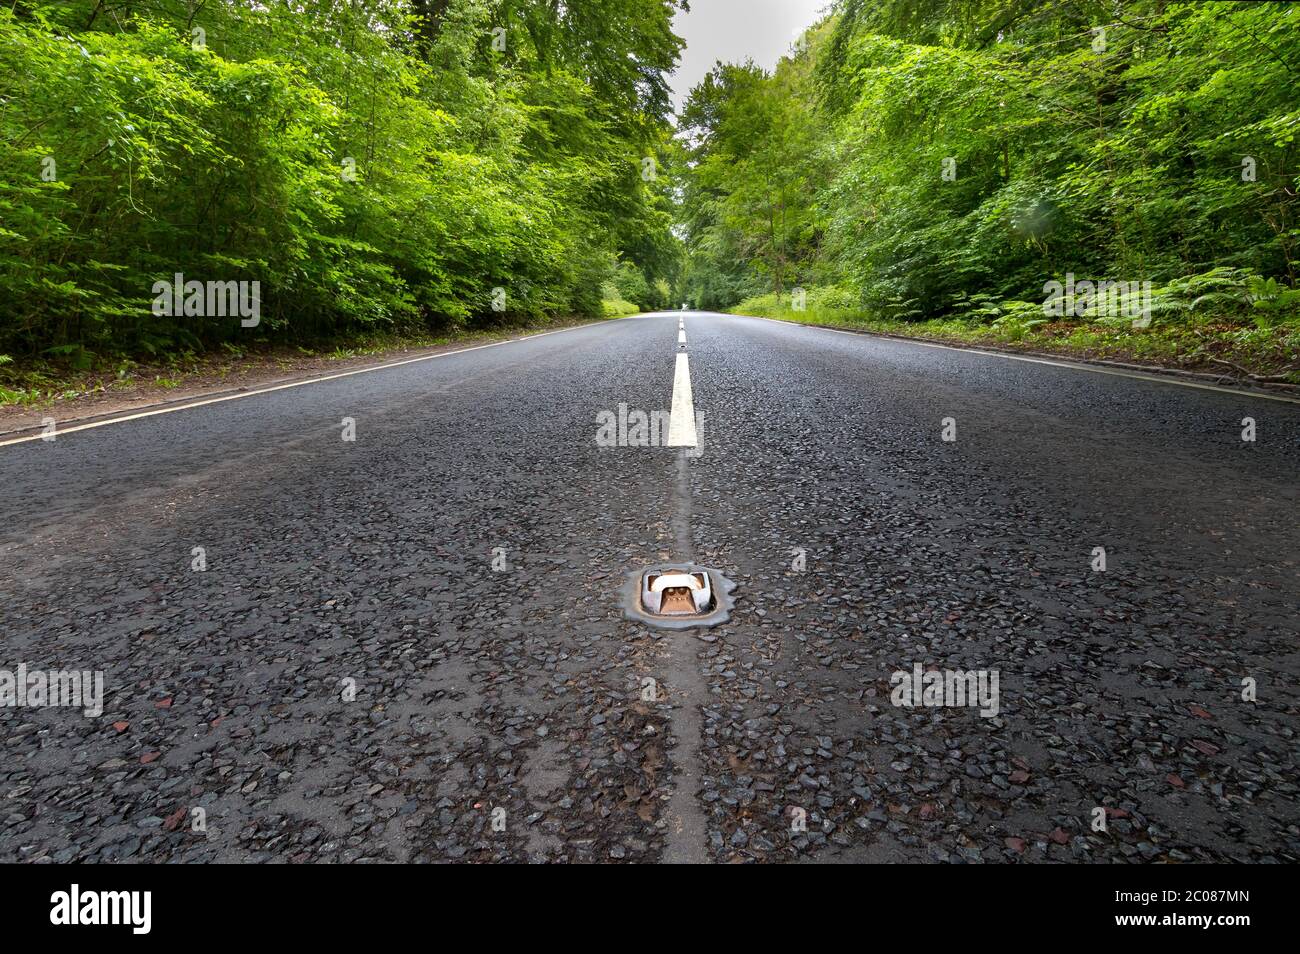 Where does the road go? Stock Photo